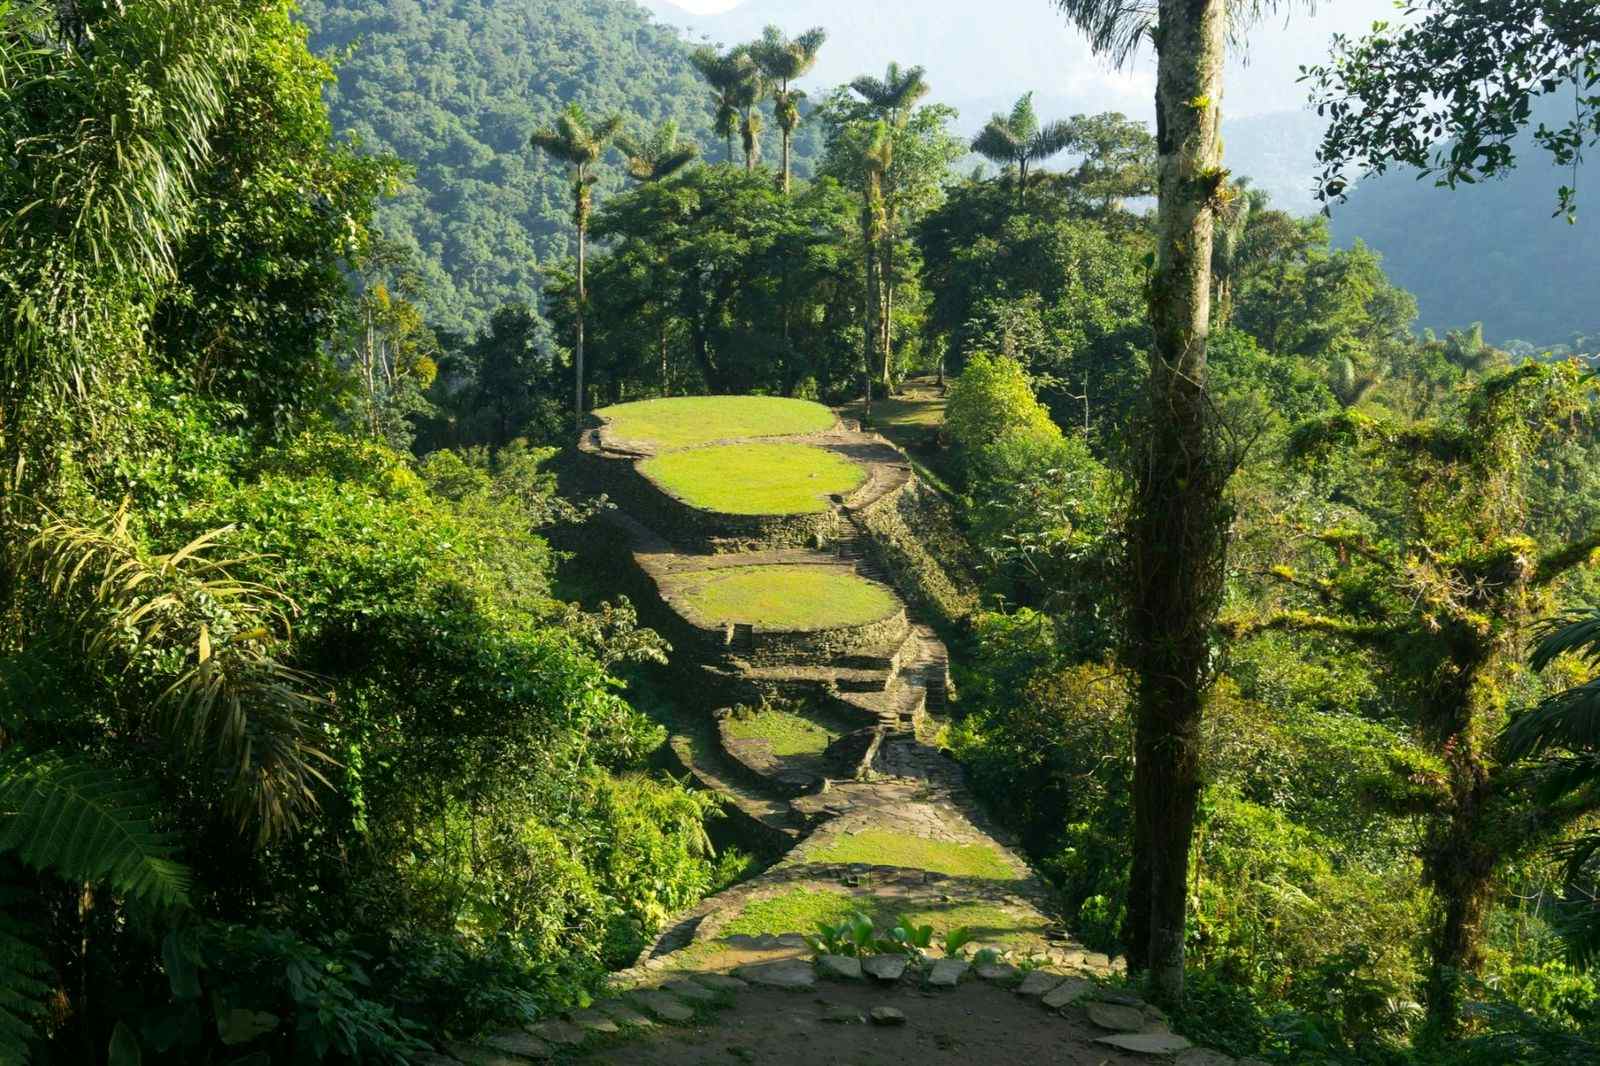 4 Top Tips for Hiking to the Lost City in Colombia